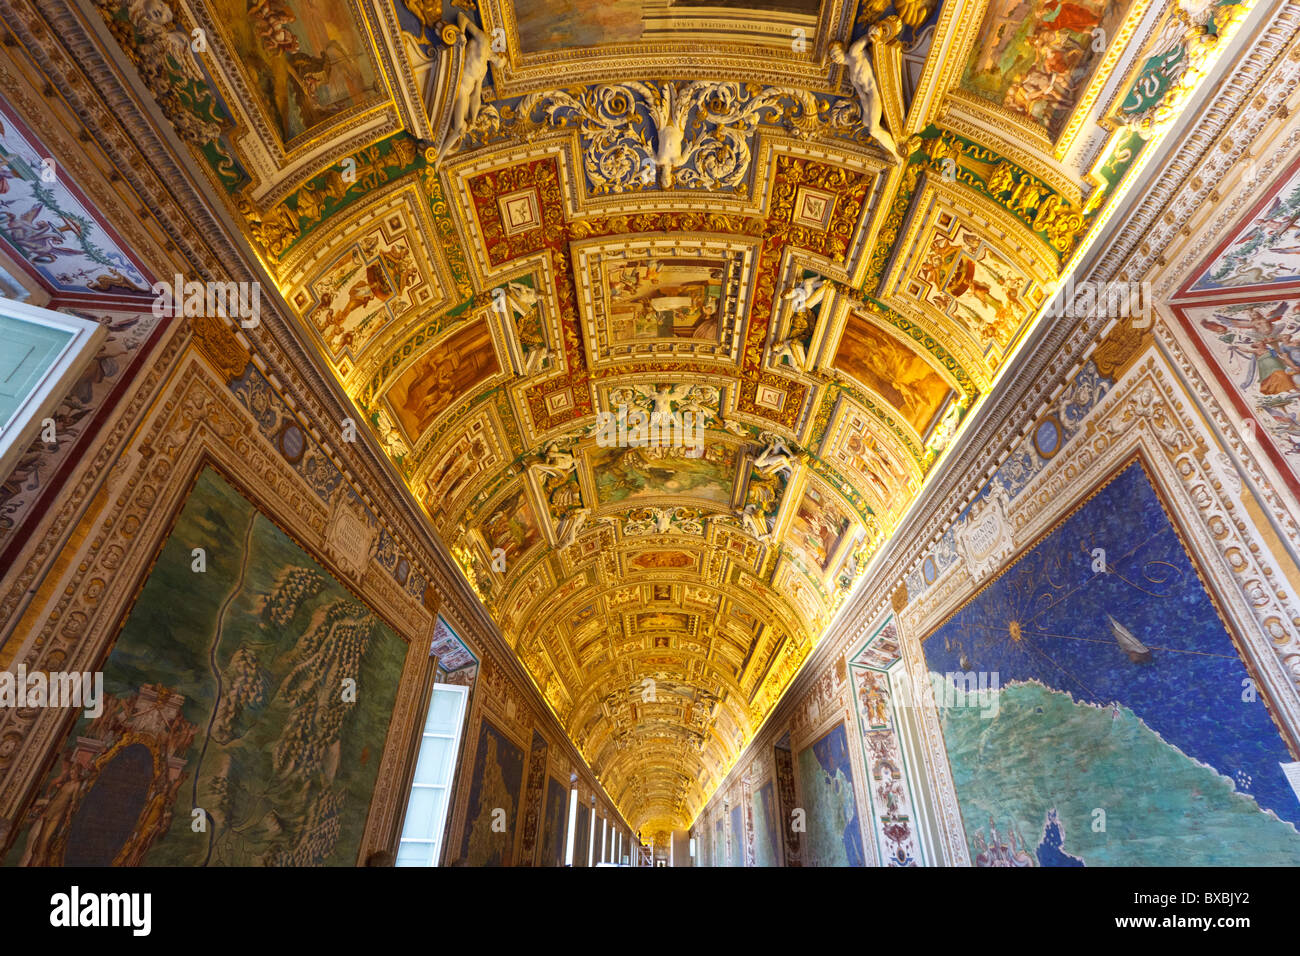 Gallery of maps inside the Vatican Museum Stock Photo